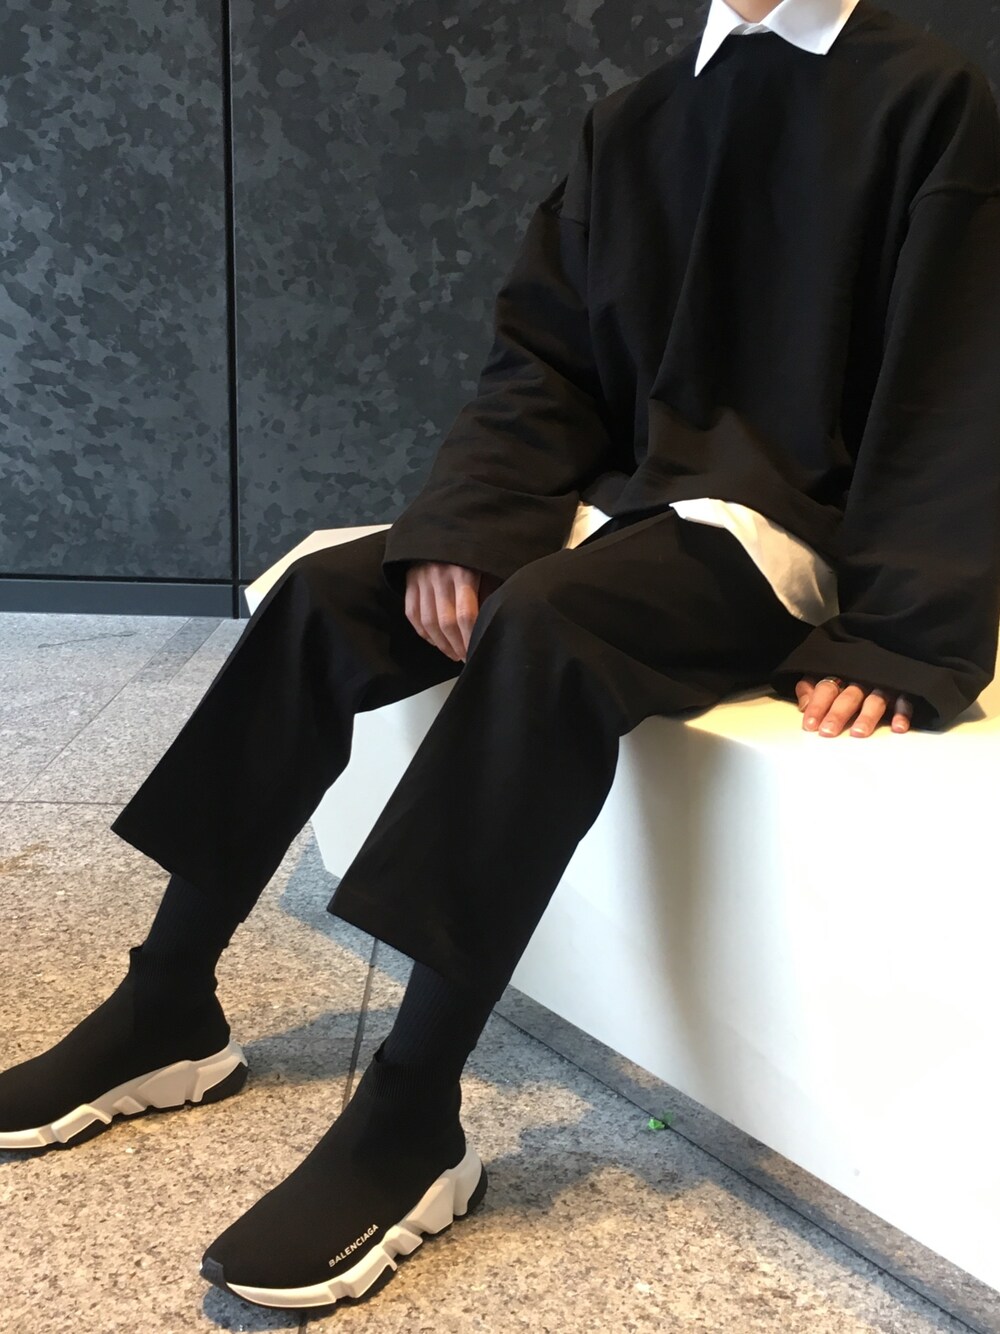 balenciaga shoes with suit